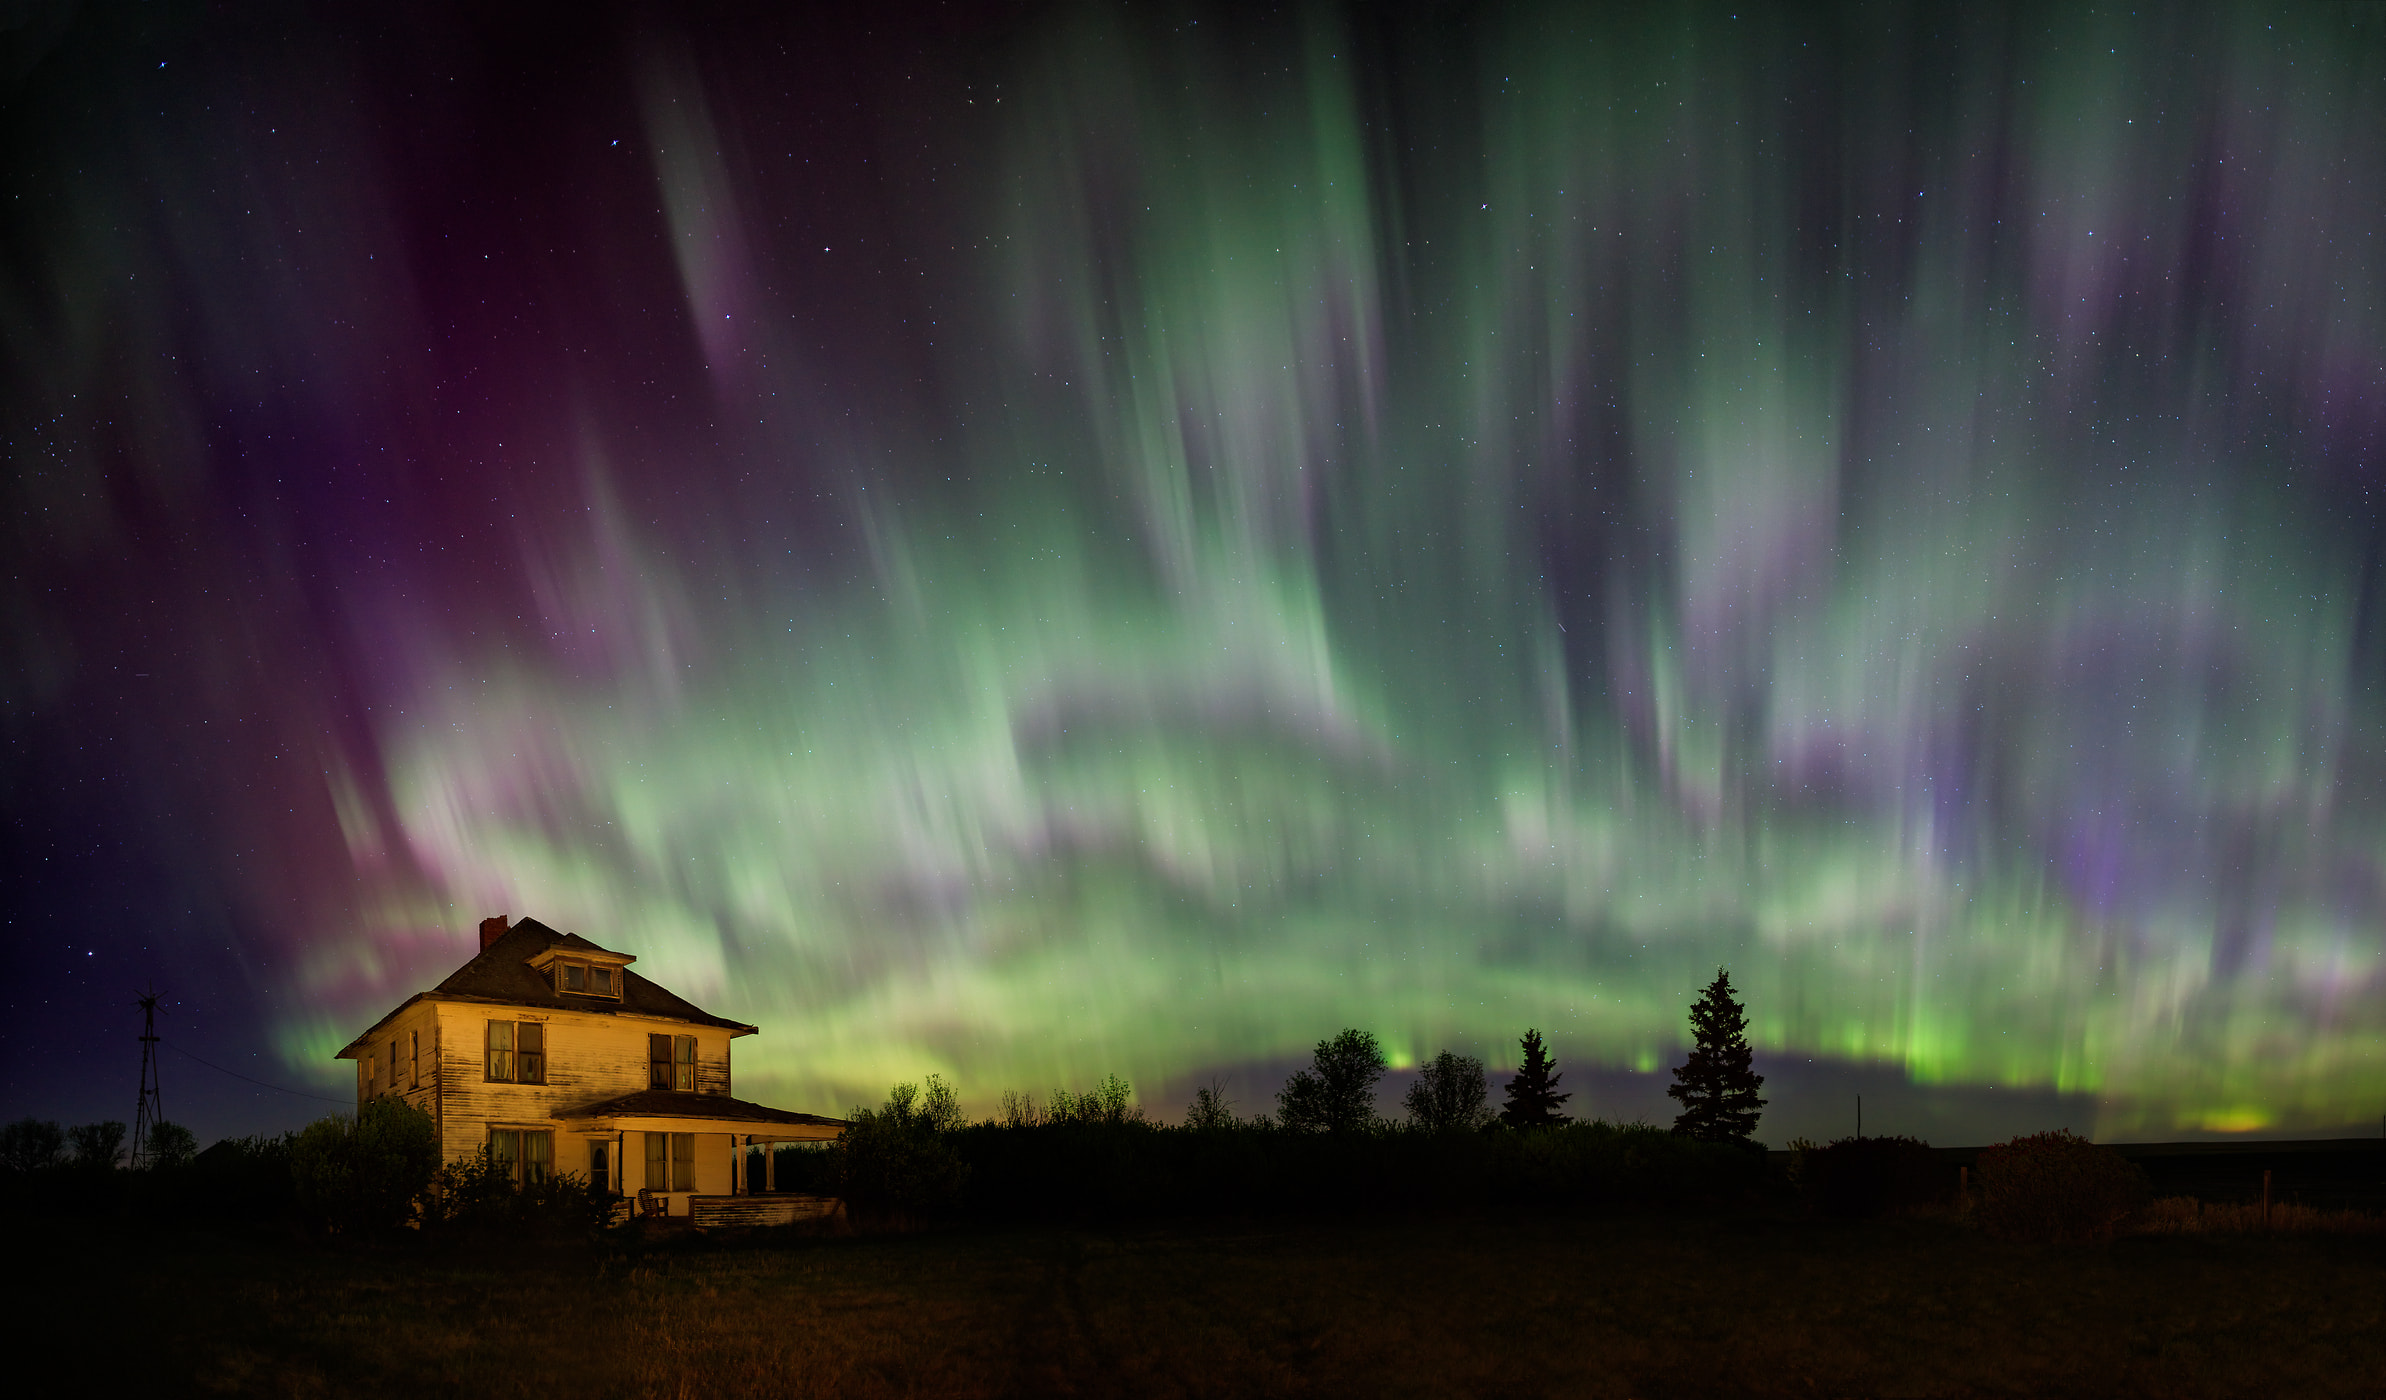 191 megapixels! A very high resolution, large-format VAST photo of an eerie creepy abandoned house under the Aurora Borealis Northern Lights; fine art landscape photo created by Scott Dimond in Alberta, Canada.